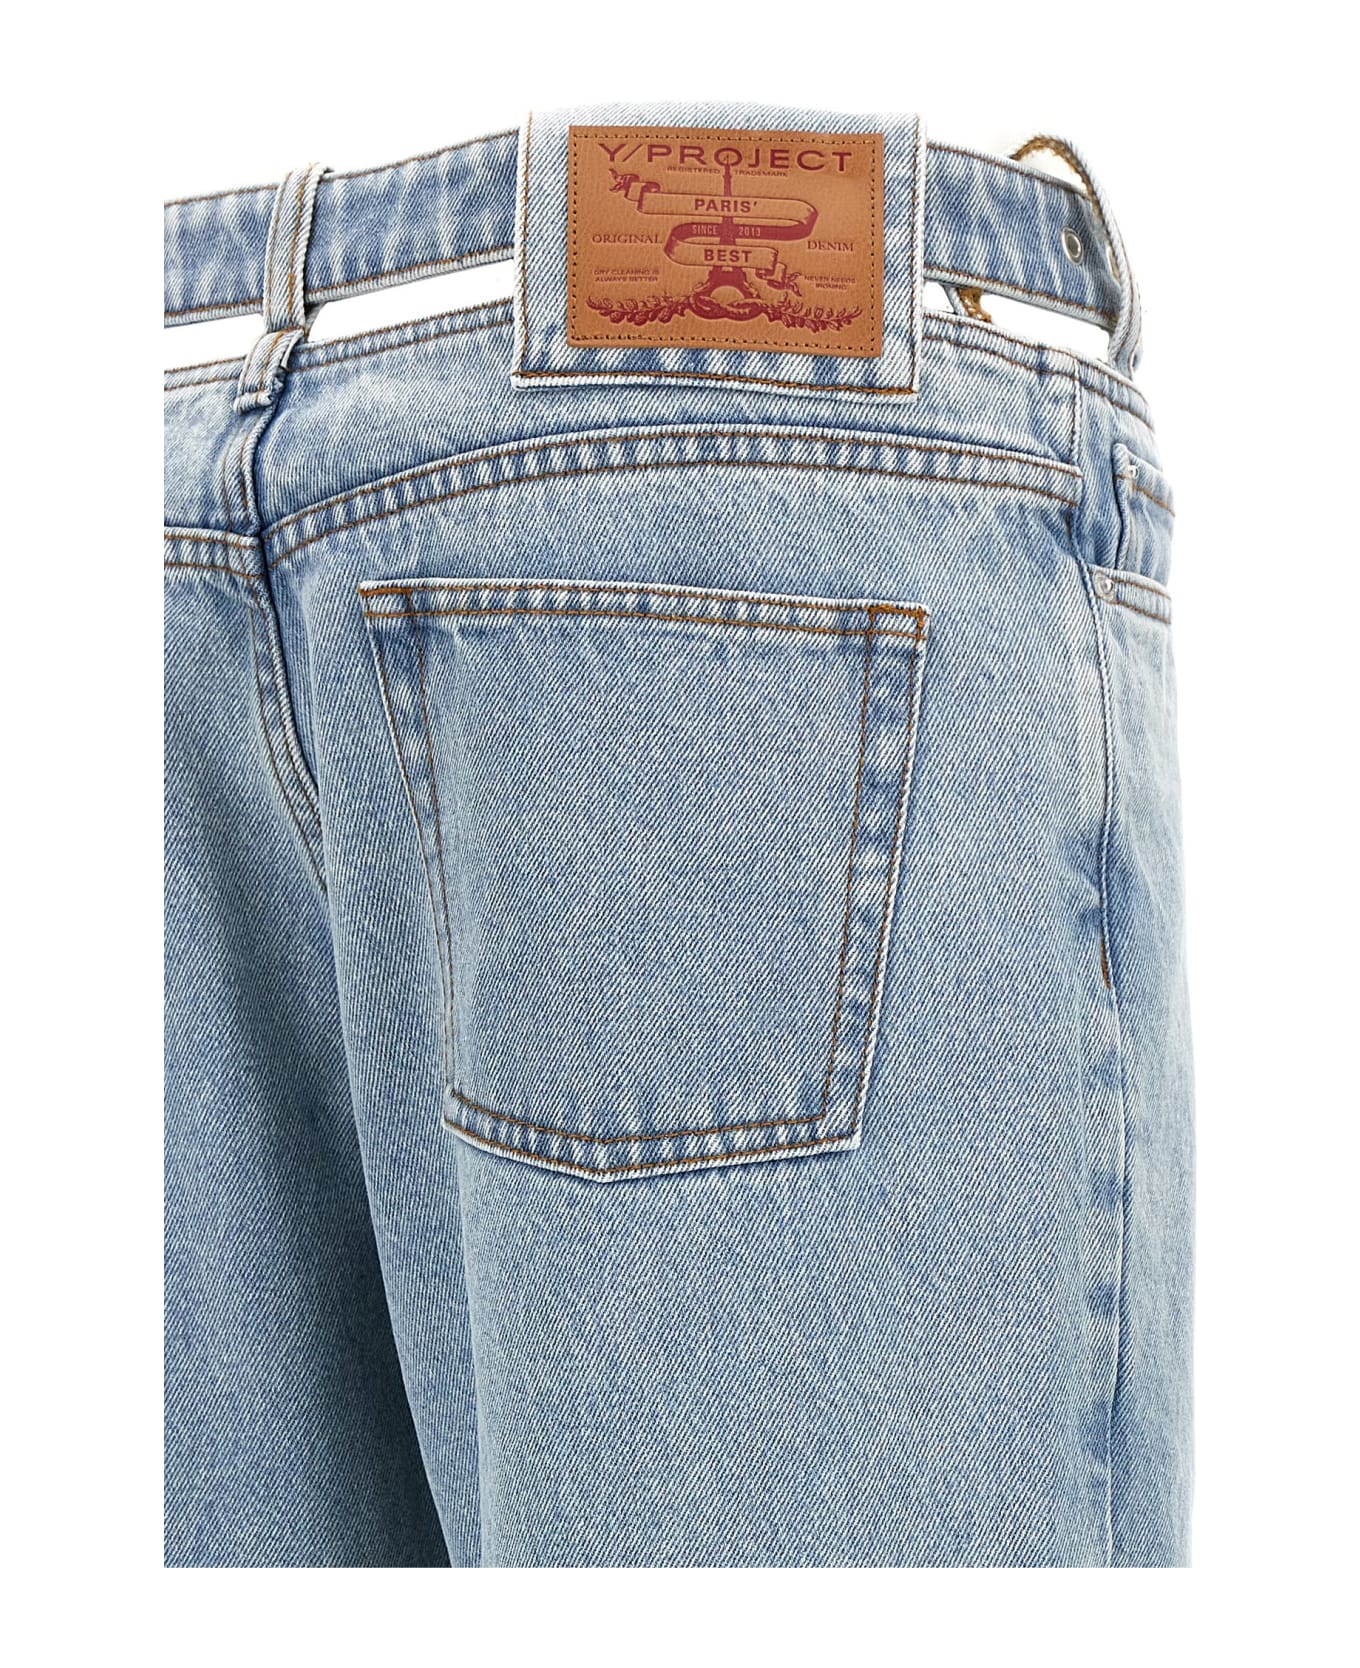 Y/Project 'evergreen Y Belt' Jeans - Light Blue デニム